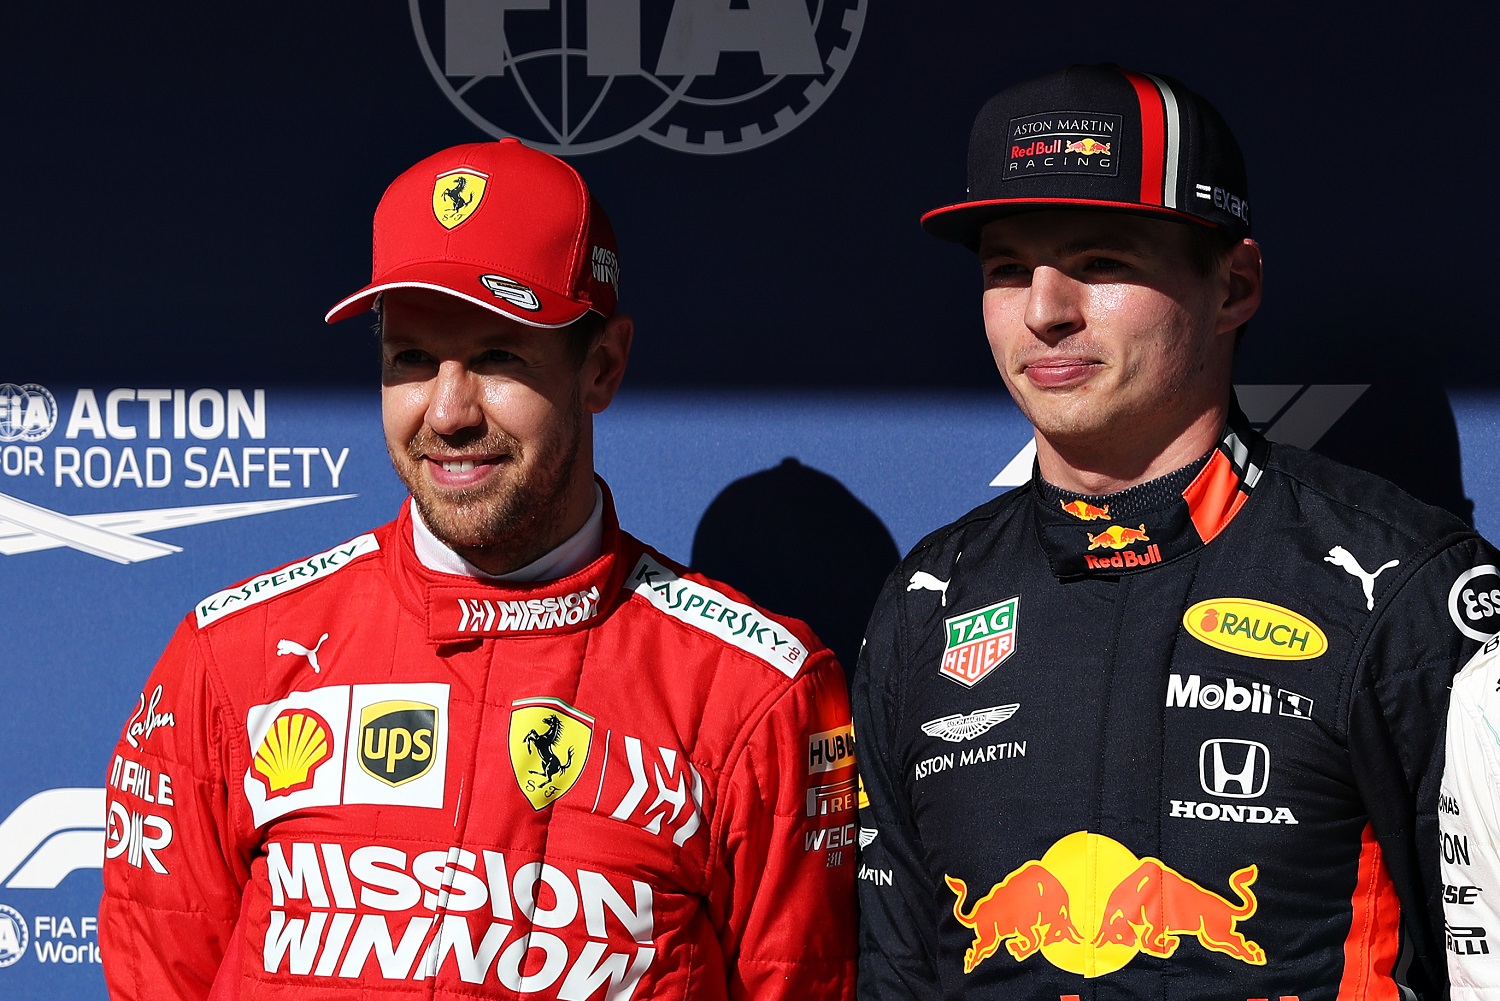 Max Verstappen of the Netherlands and Sebastian Vettel of Germany pose in parc ferme after qualifying for the Formula 1 Grand Prix of Brazil at Autodromo Jose Carlos Pace on Nov. 16, 2019, in Sao Paulo, Brazil. | Mark Thompson/Getty Images